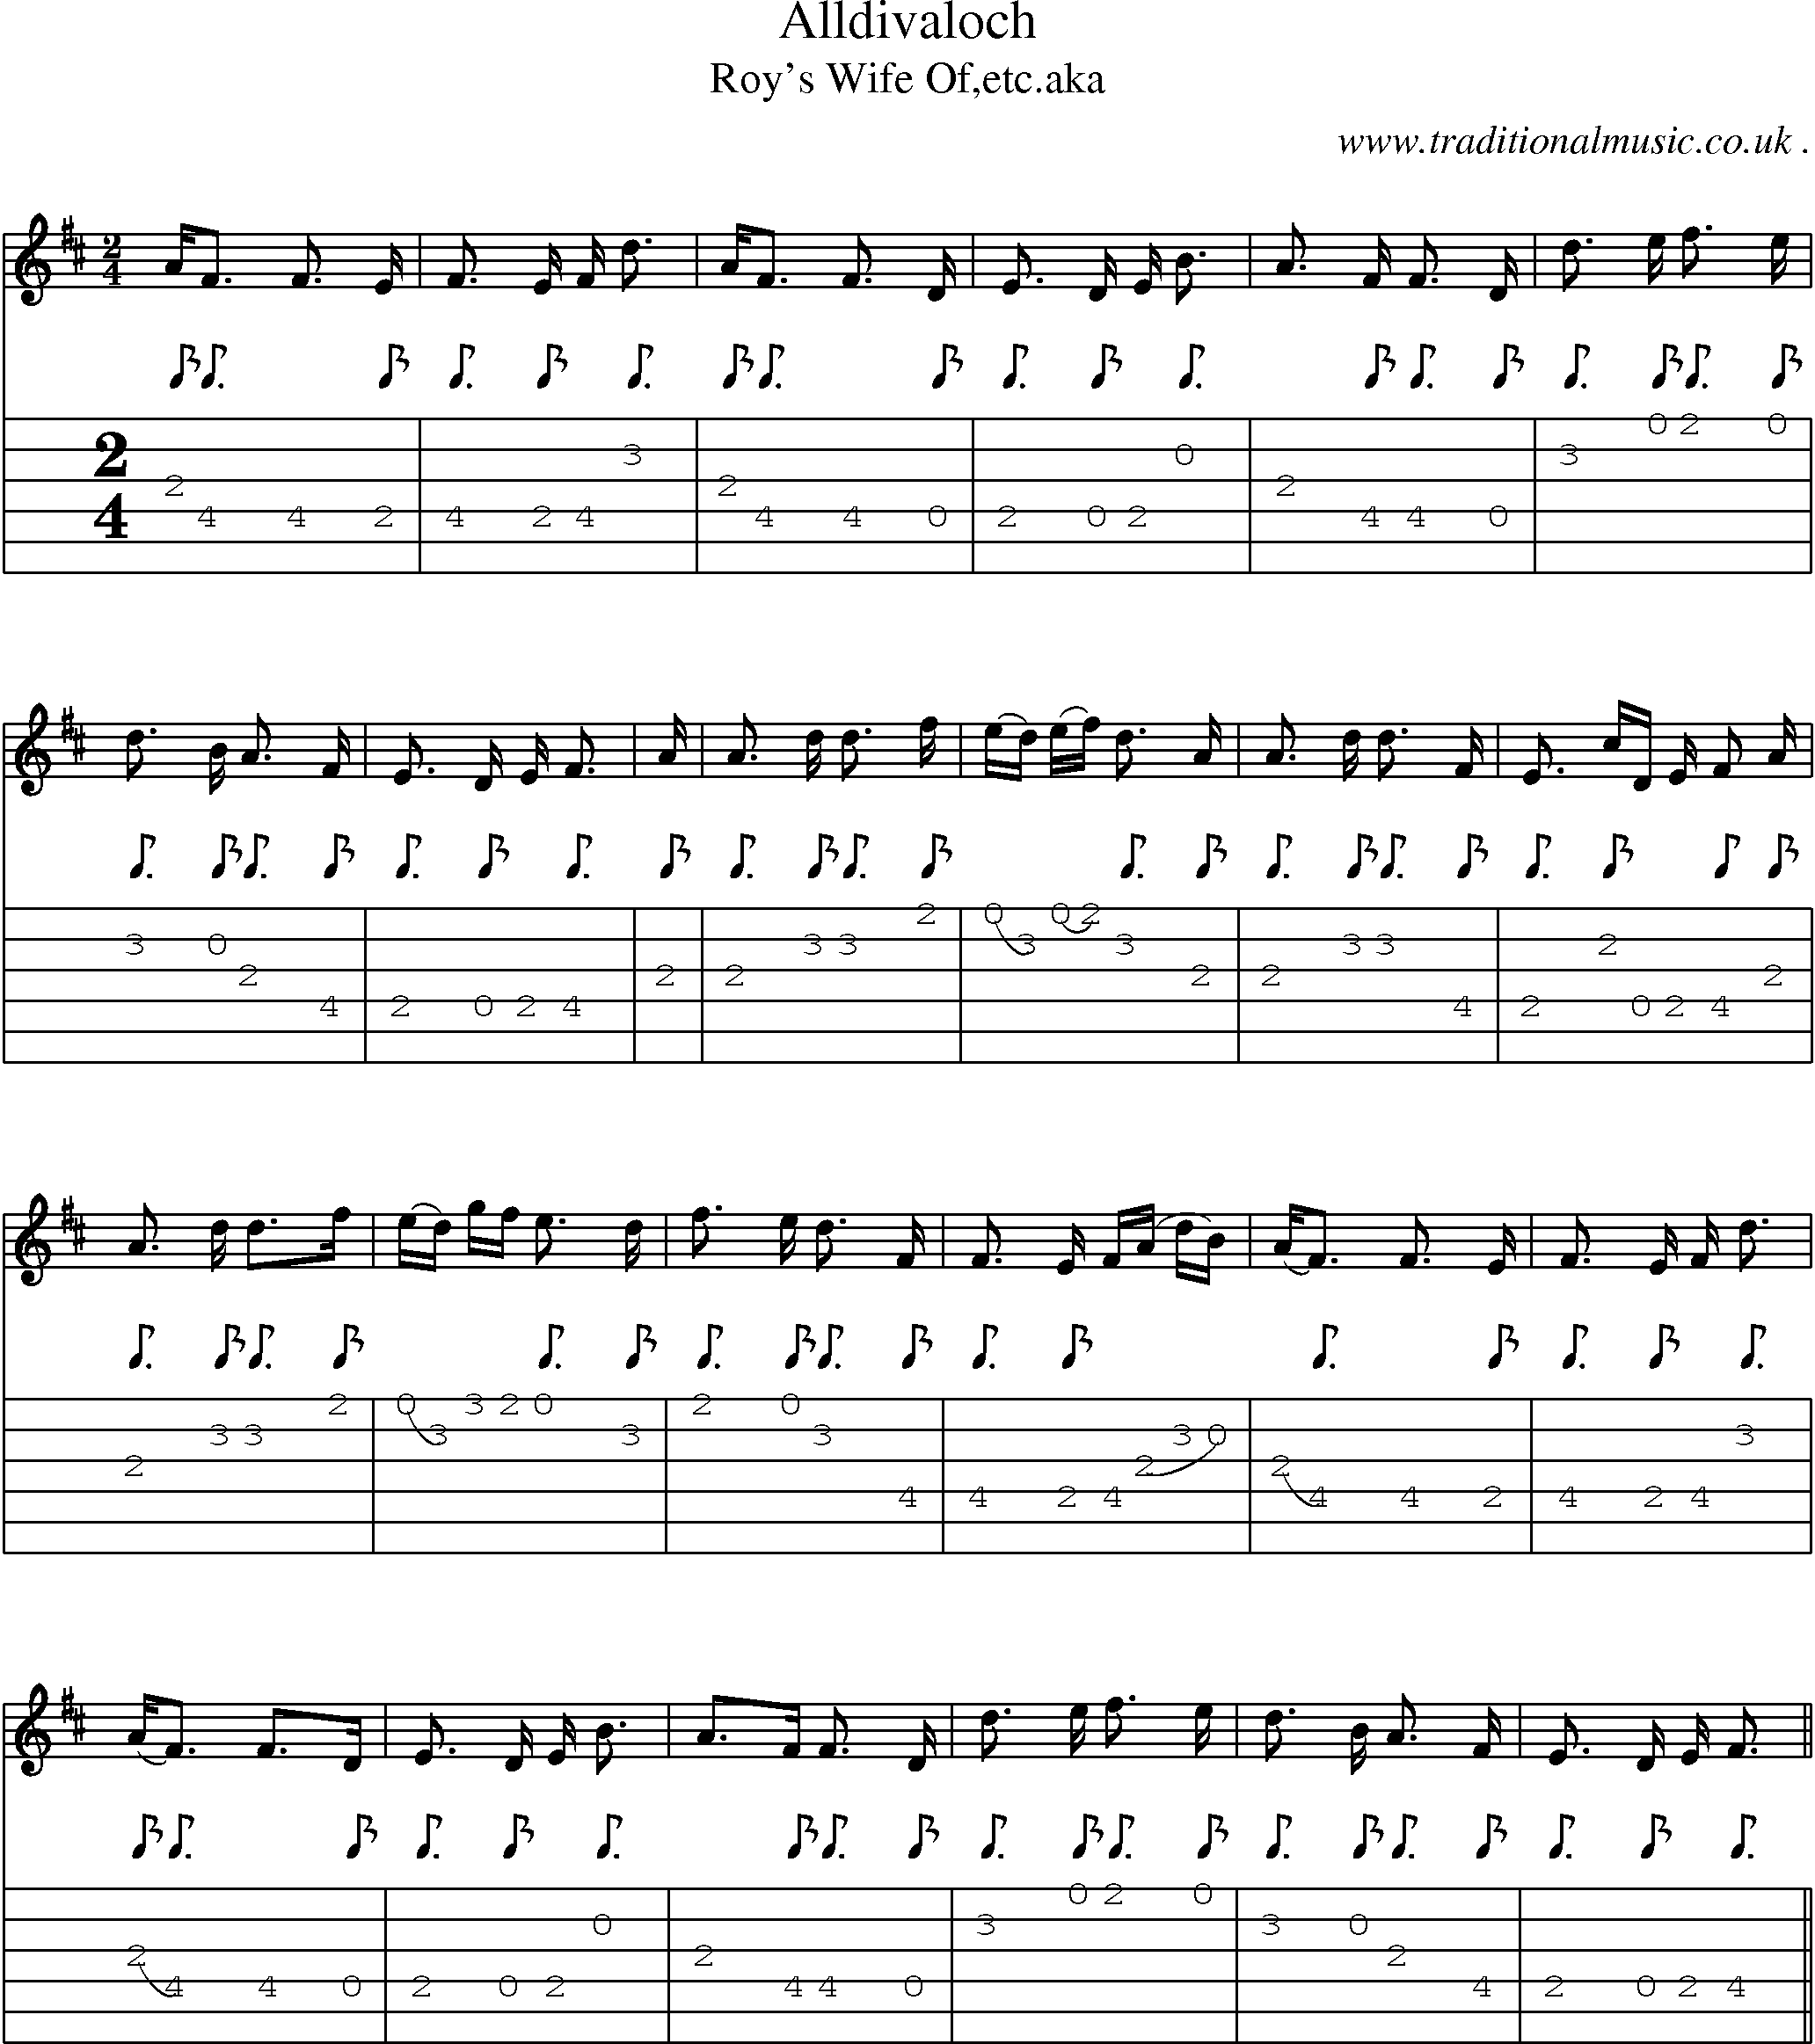 Sheet-Music and Guitar Tabs for Alldivaloch